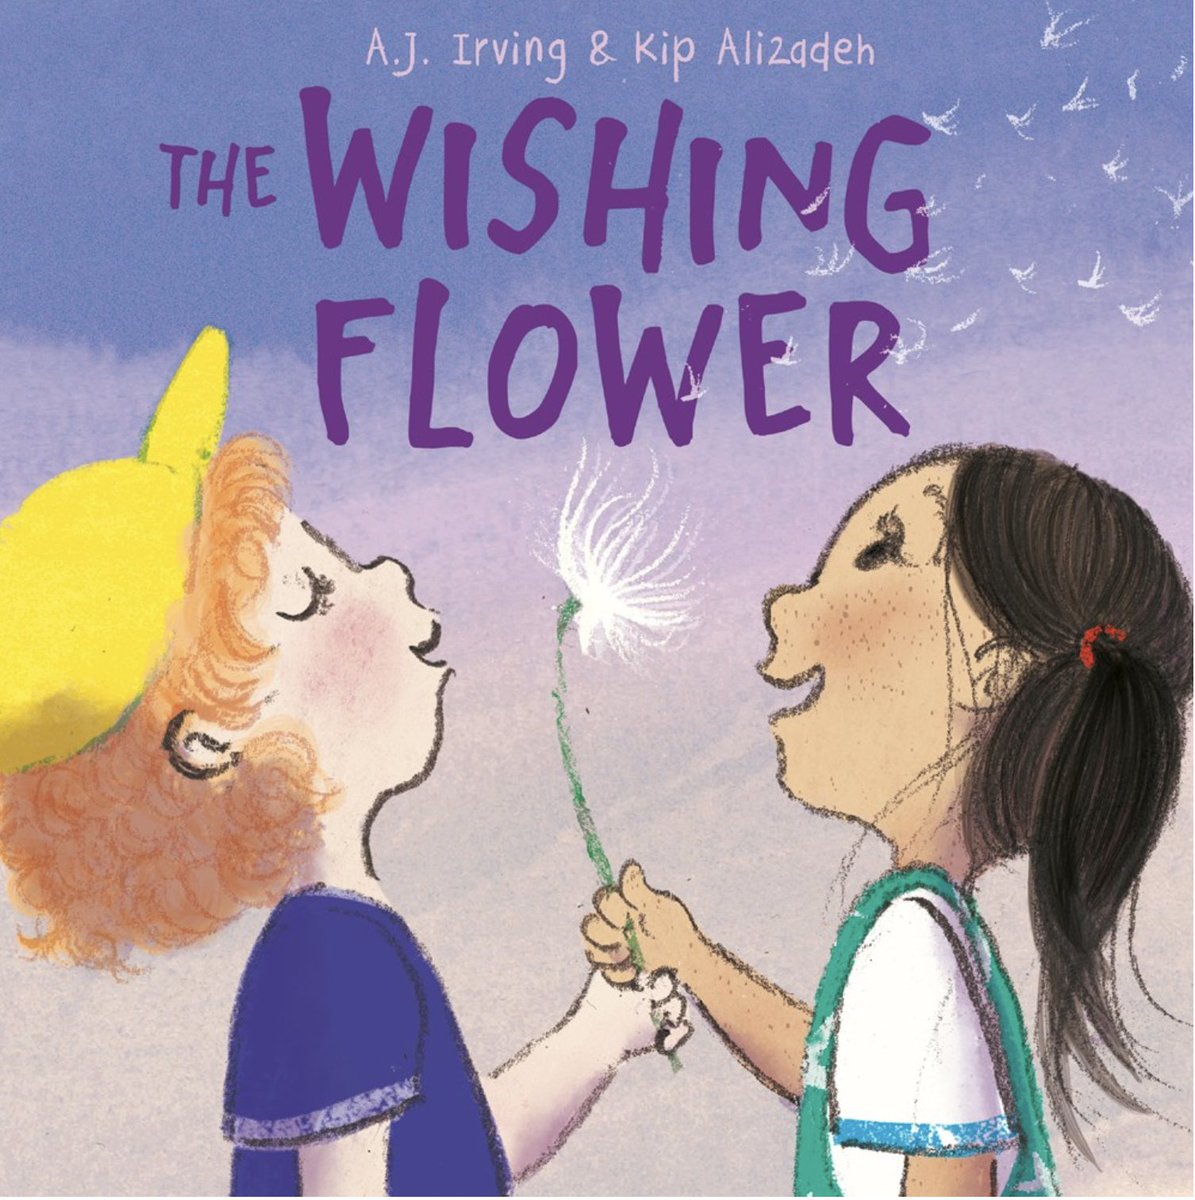 I read an eARC of this very sweet picture book coming out on May 30, 2023: THE WISHING FLOWER by @aj_irving illustrated by @kipalizadeh Pre-Order bit.ly/3Ux66aQ 🌈 Activity Pack & Educational Guide at ajirving.com/activities @KnopfBFYR #LGBTQIA #PictureBooks